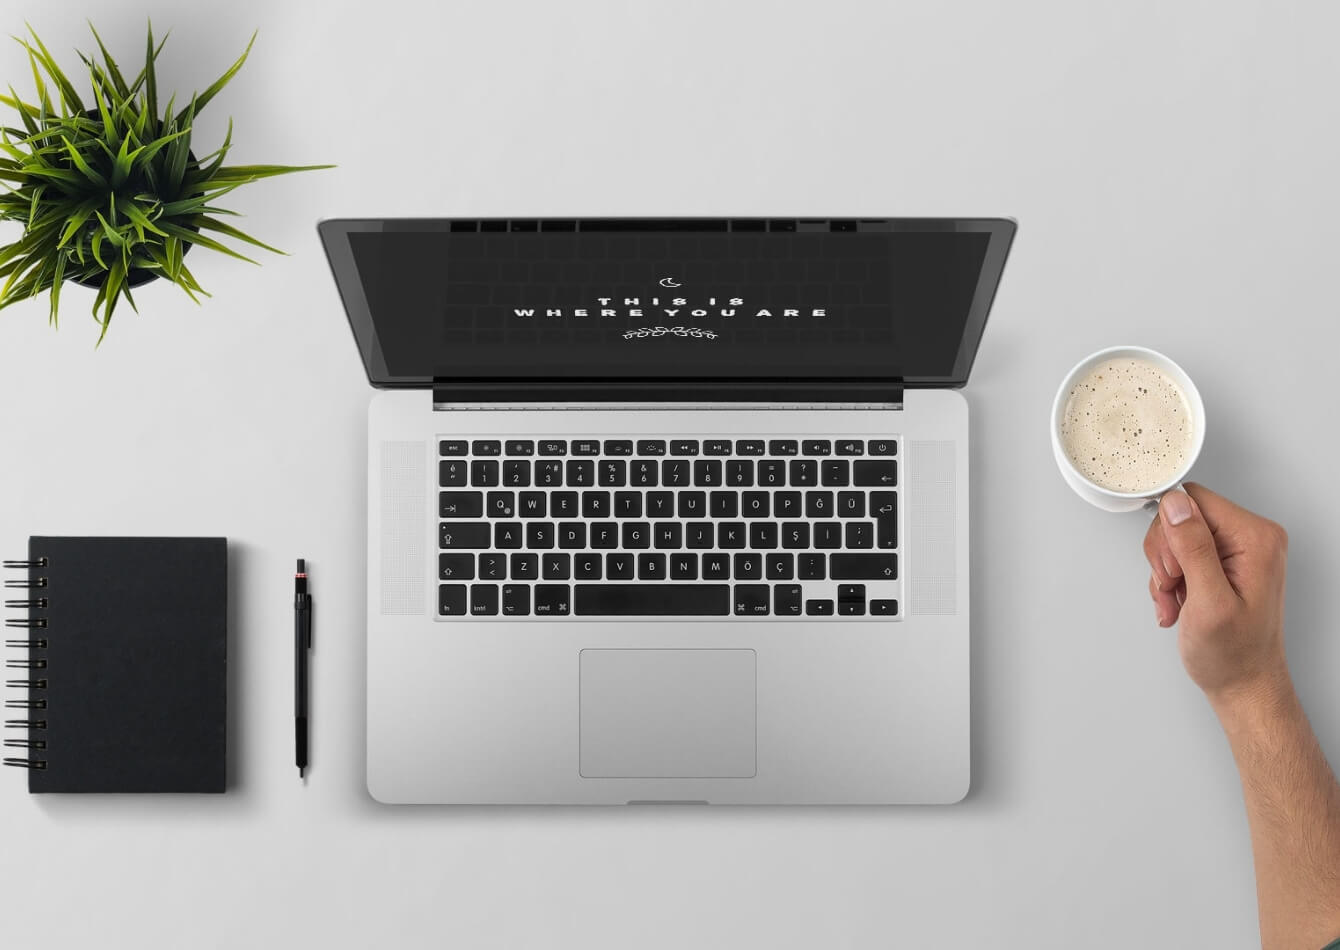 laptop, pen, notebook, plant on a table and a hand holding a coffee cup